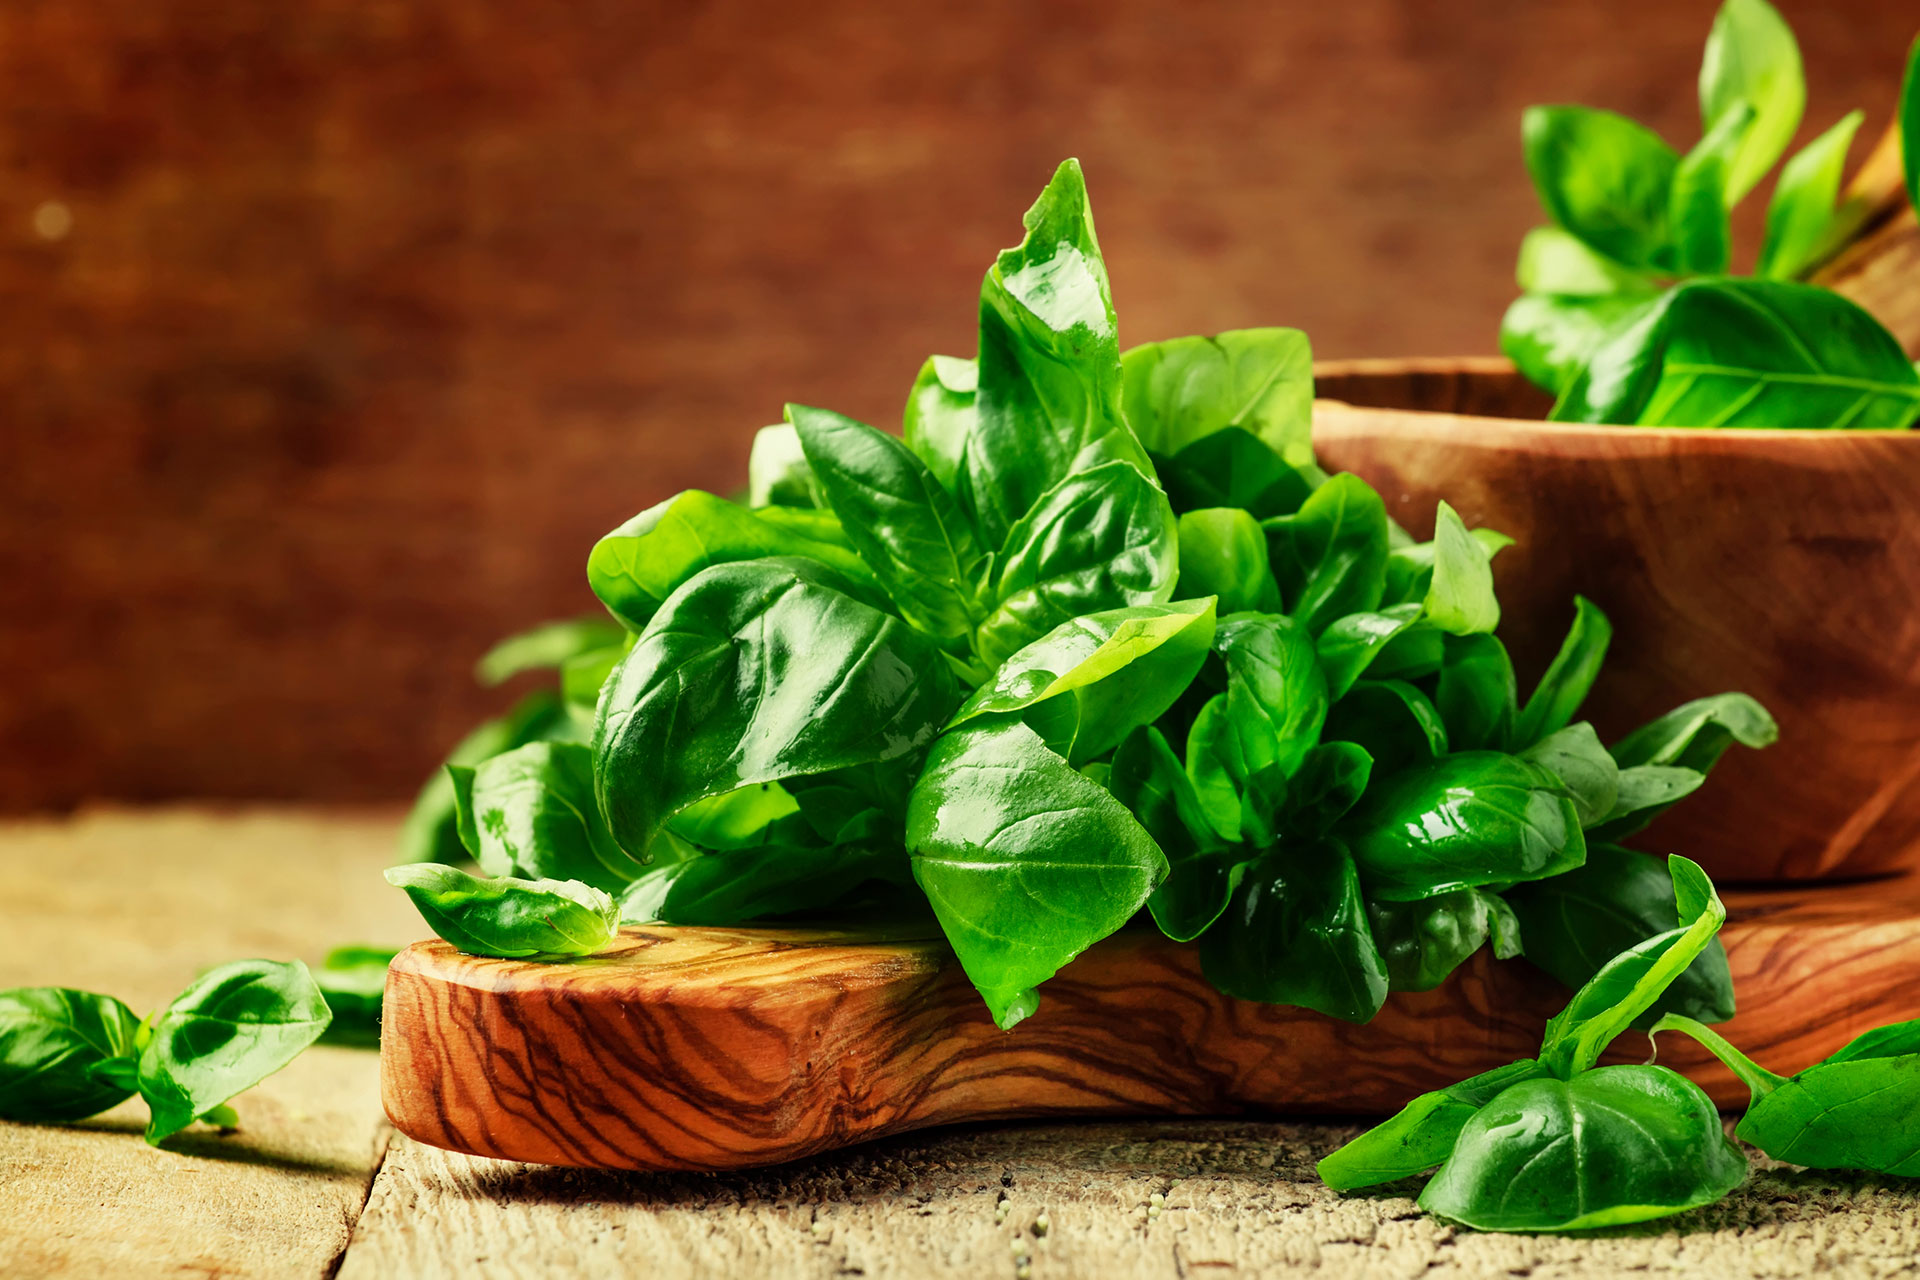 Basil leaves on a wooden board